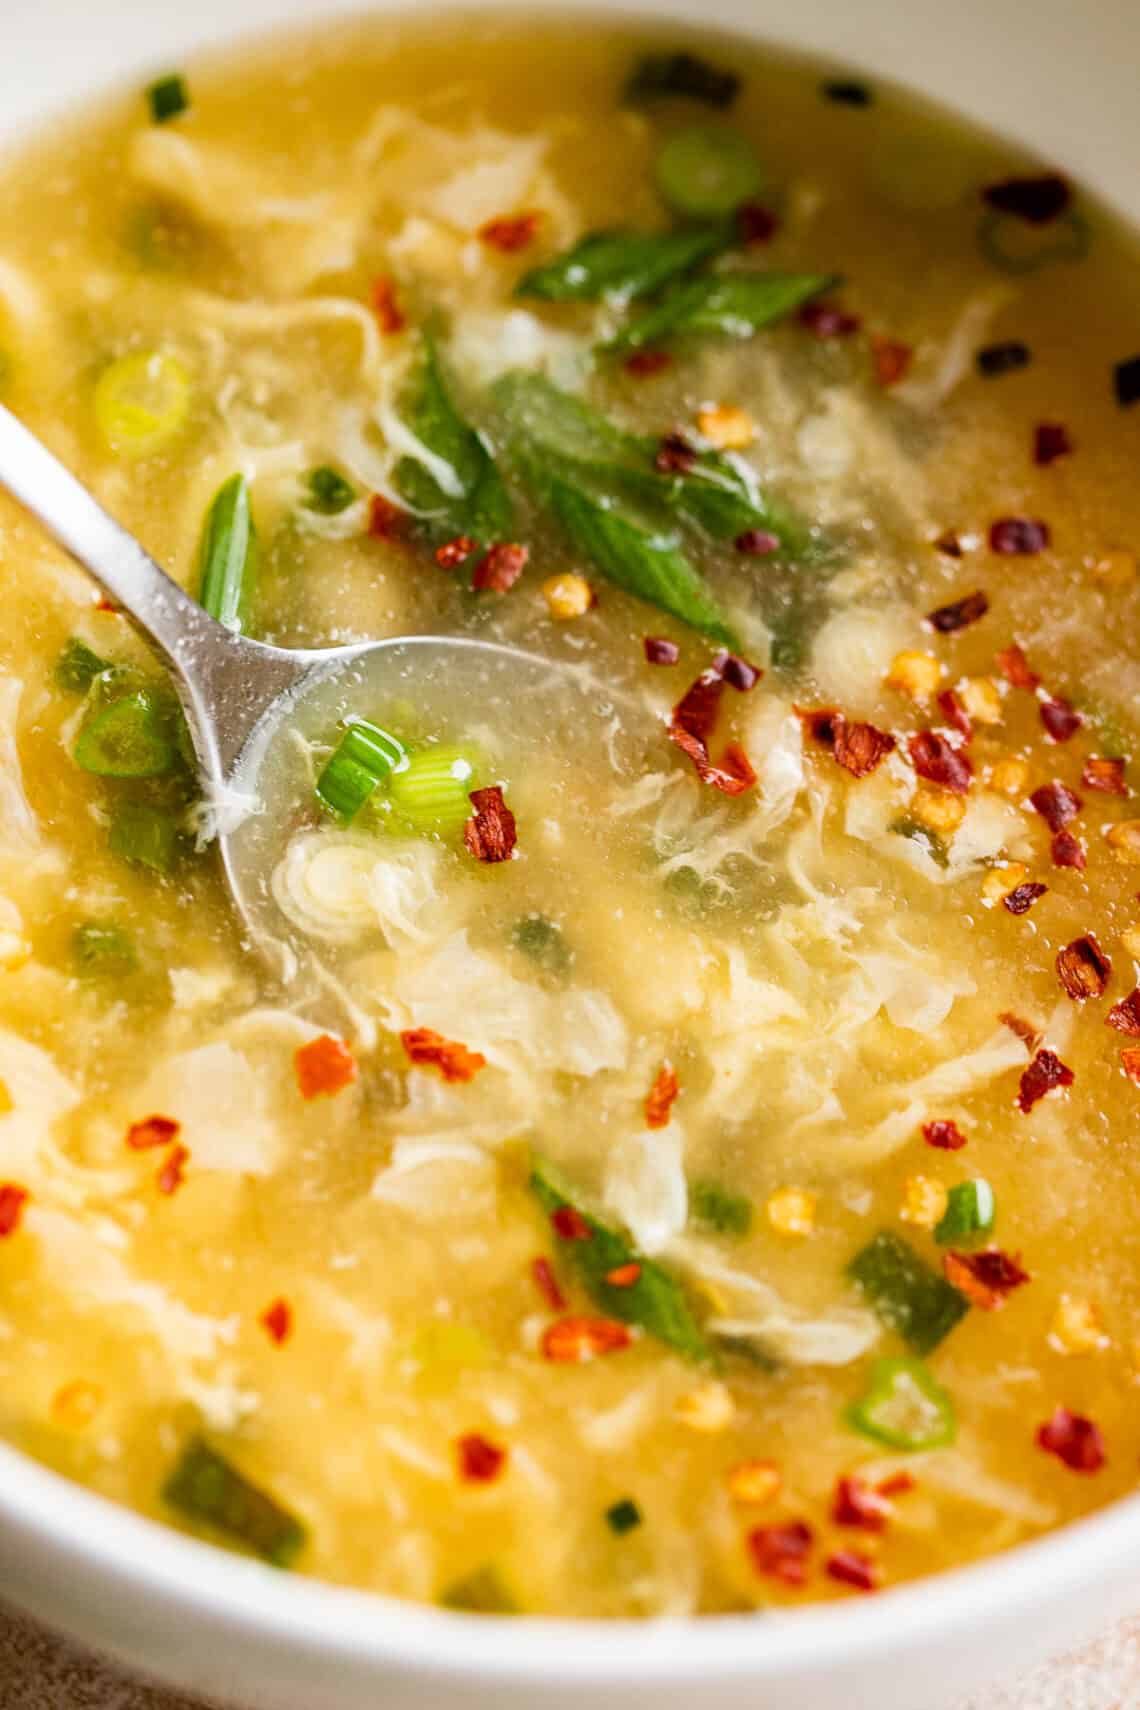 Easy Egg Drop Soup Recipe  How to Make The Best Egg Drop Soup